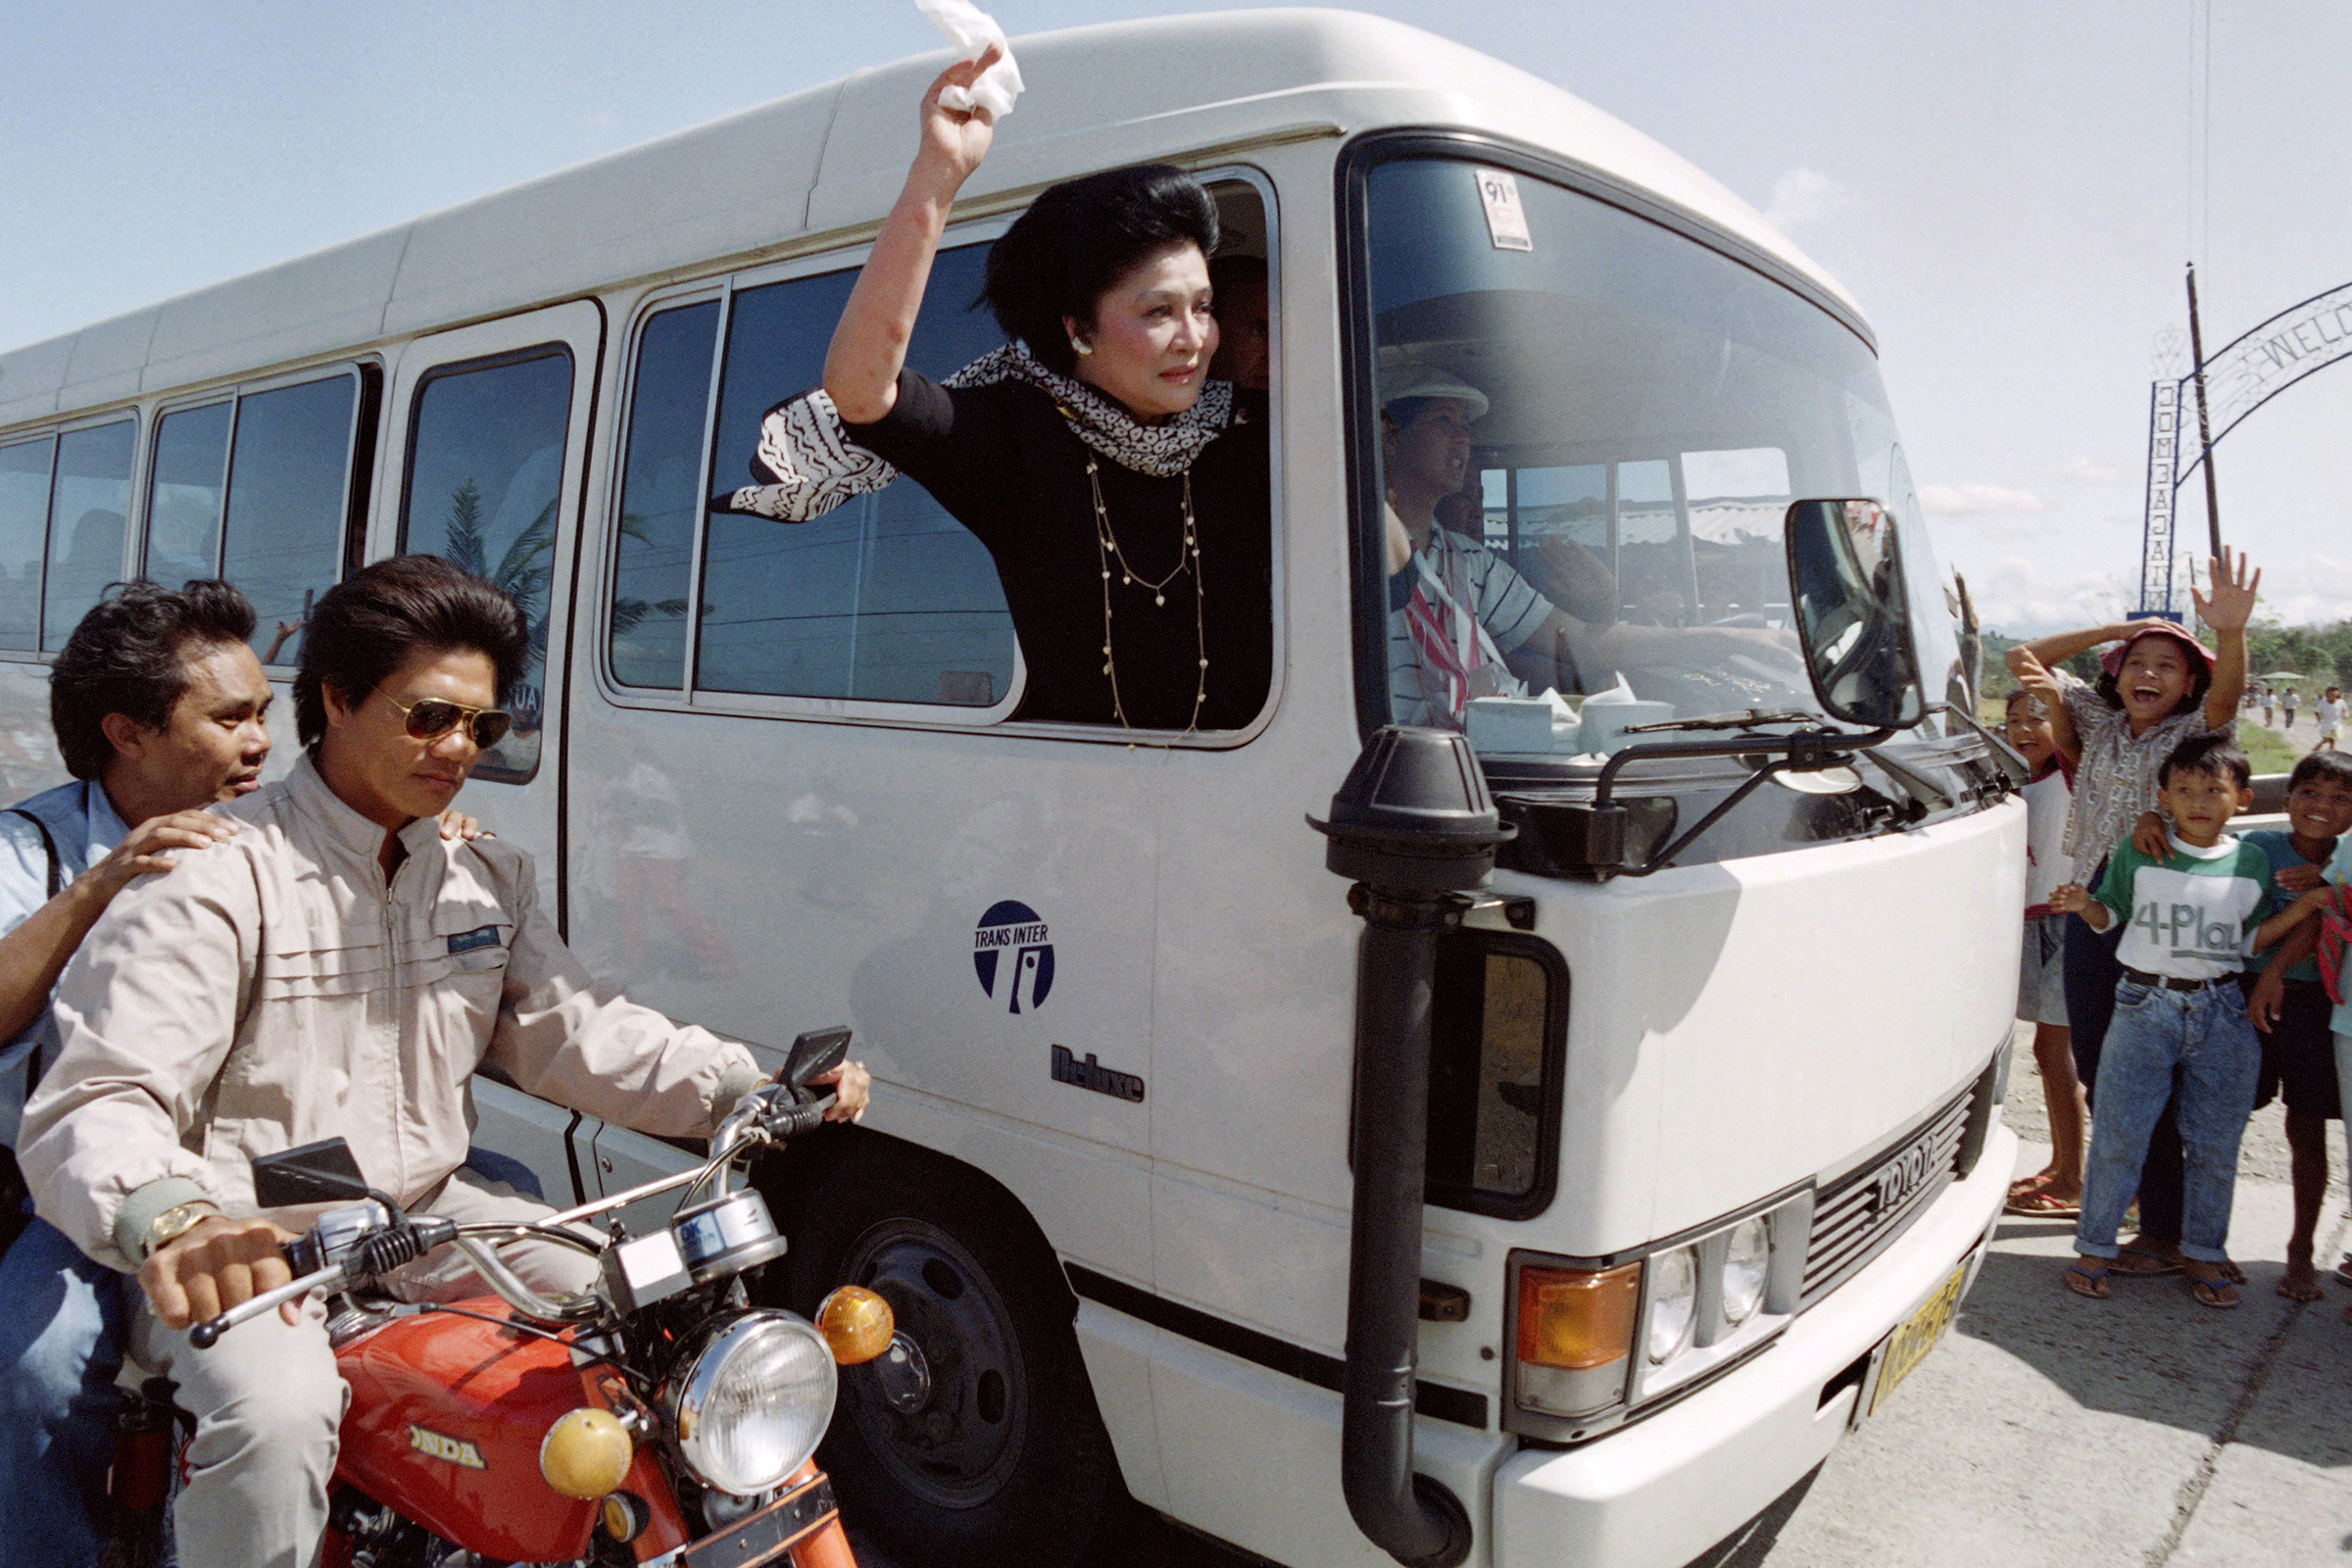 Imelda Marcos waves from a motorcade as she arrives in Laoag, the hometown of her late husband Ferdinand, on November 5, 1991. (Manny Ceneta—AFP/Getty Images)